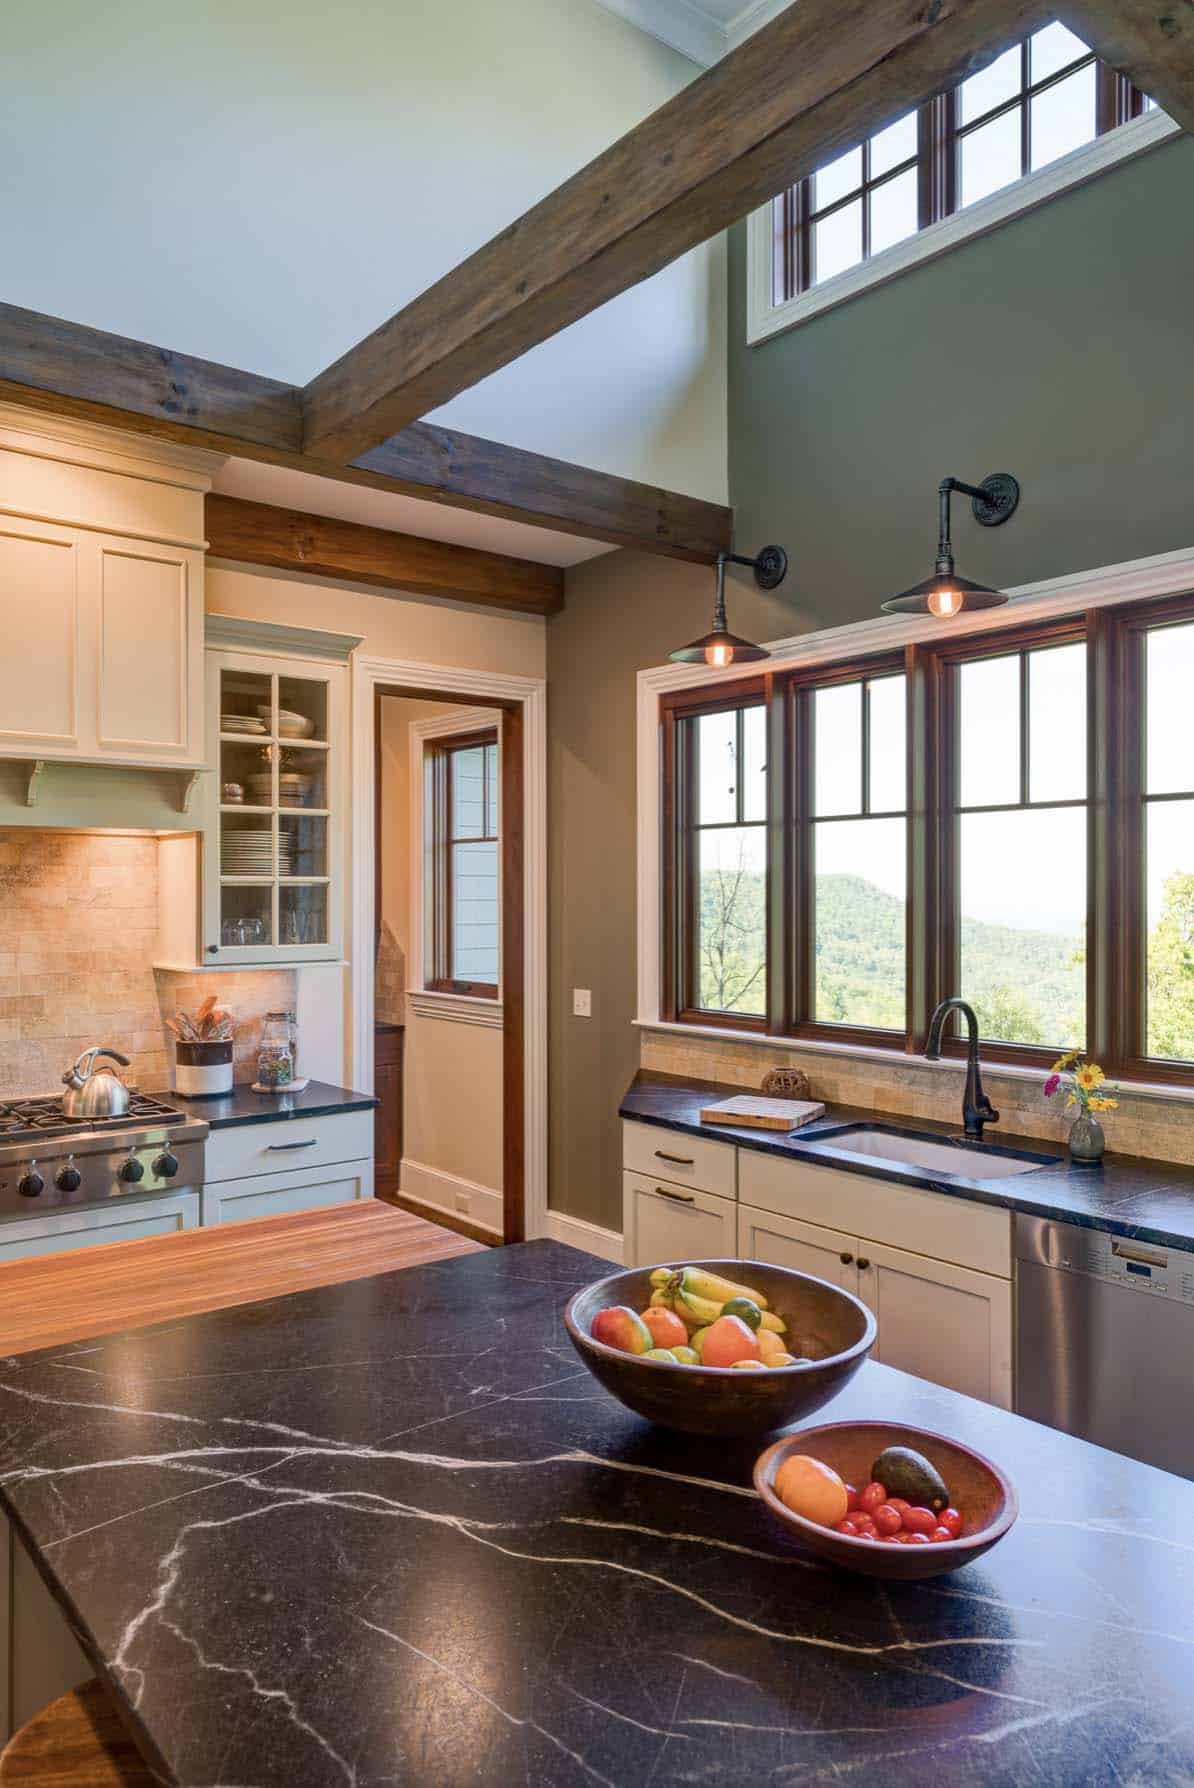 kitchen-mountain-views-vaulted-ceiling